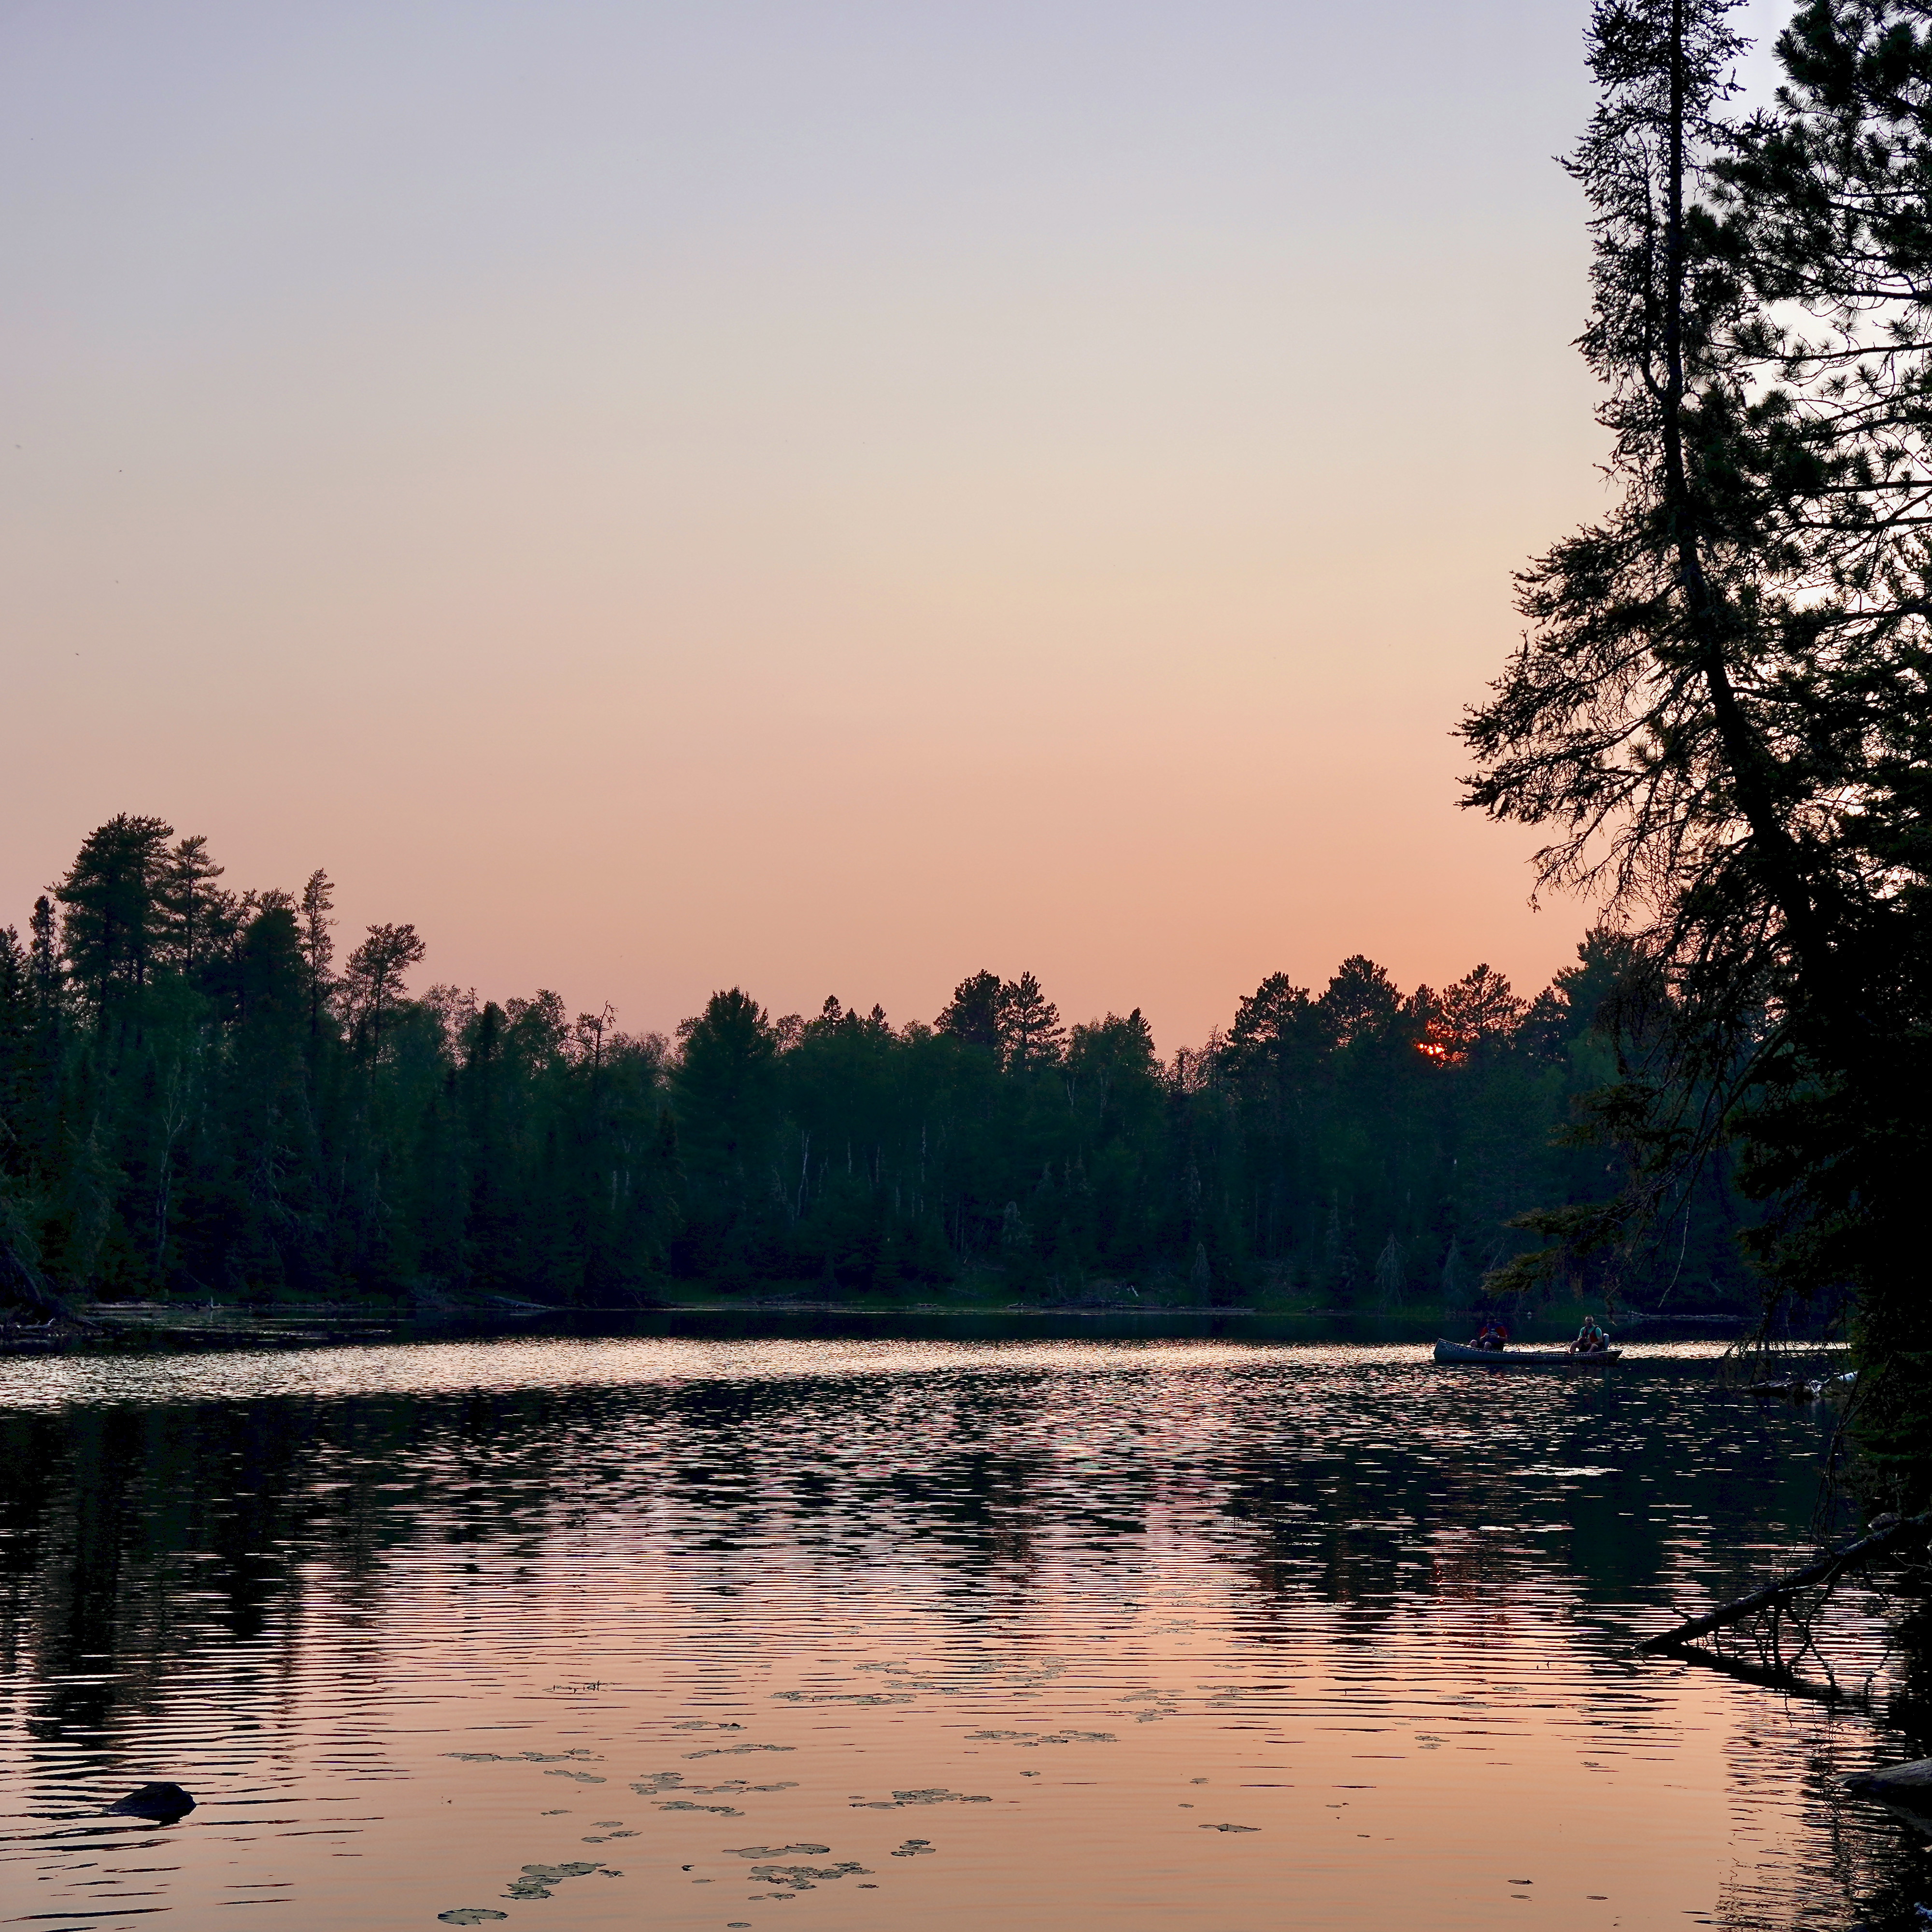 an orange sunset behind green pine forest and a lake in the foreground